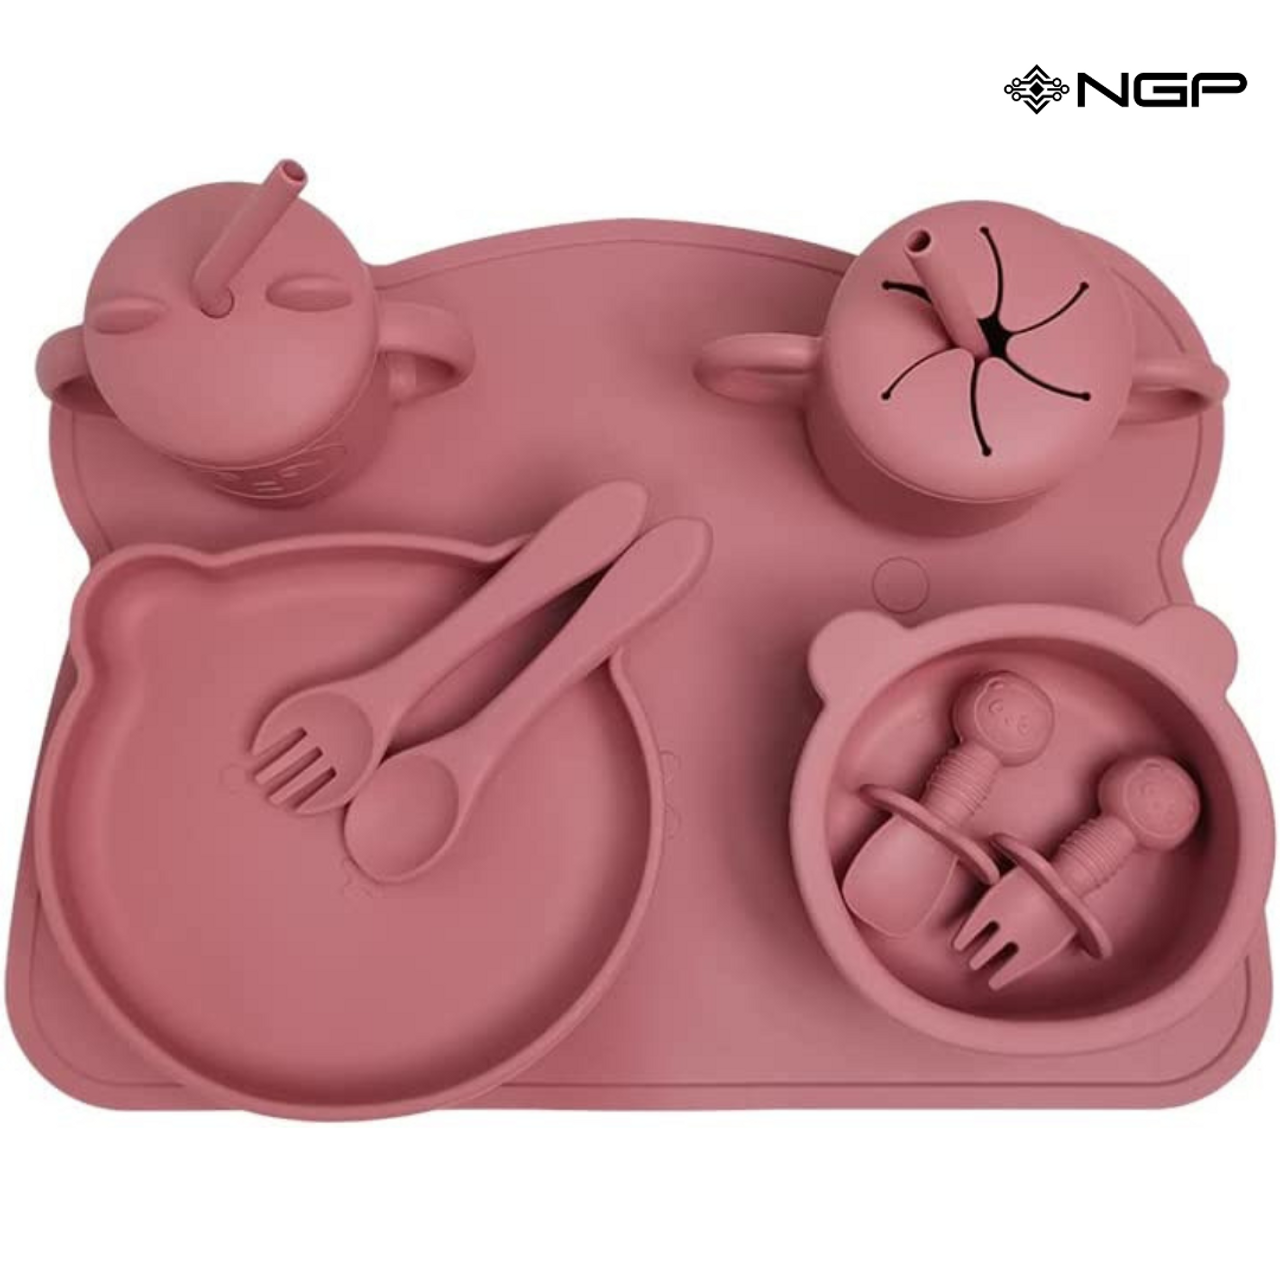 NGP Baby Silicone Feeding Set 11 Pcs Infant Dinnerware with Baby